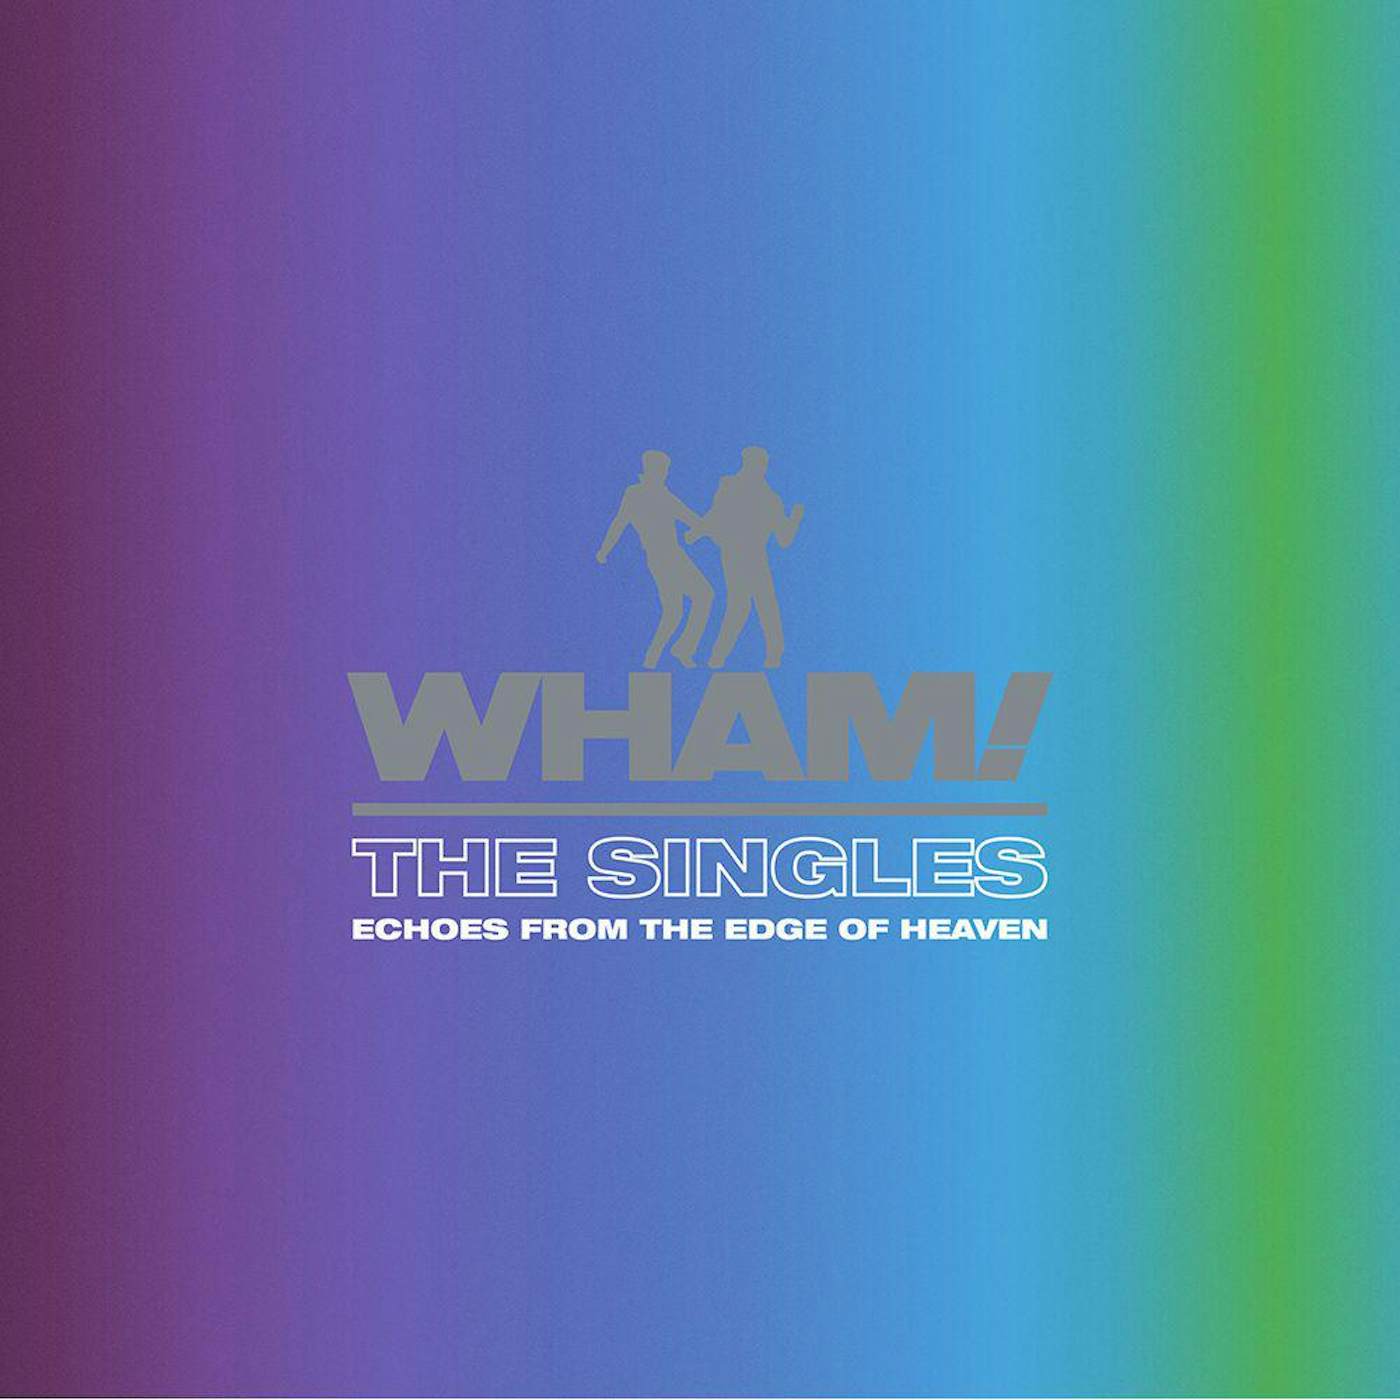 digital konsensus tiger Wham! SINGLES: ECHOES FROM THE EDGE OF HEAVEN Vinyl Record